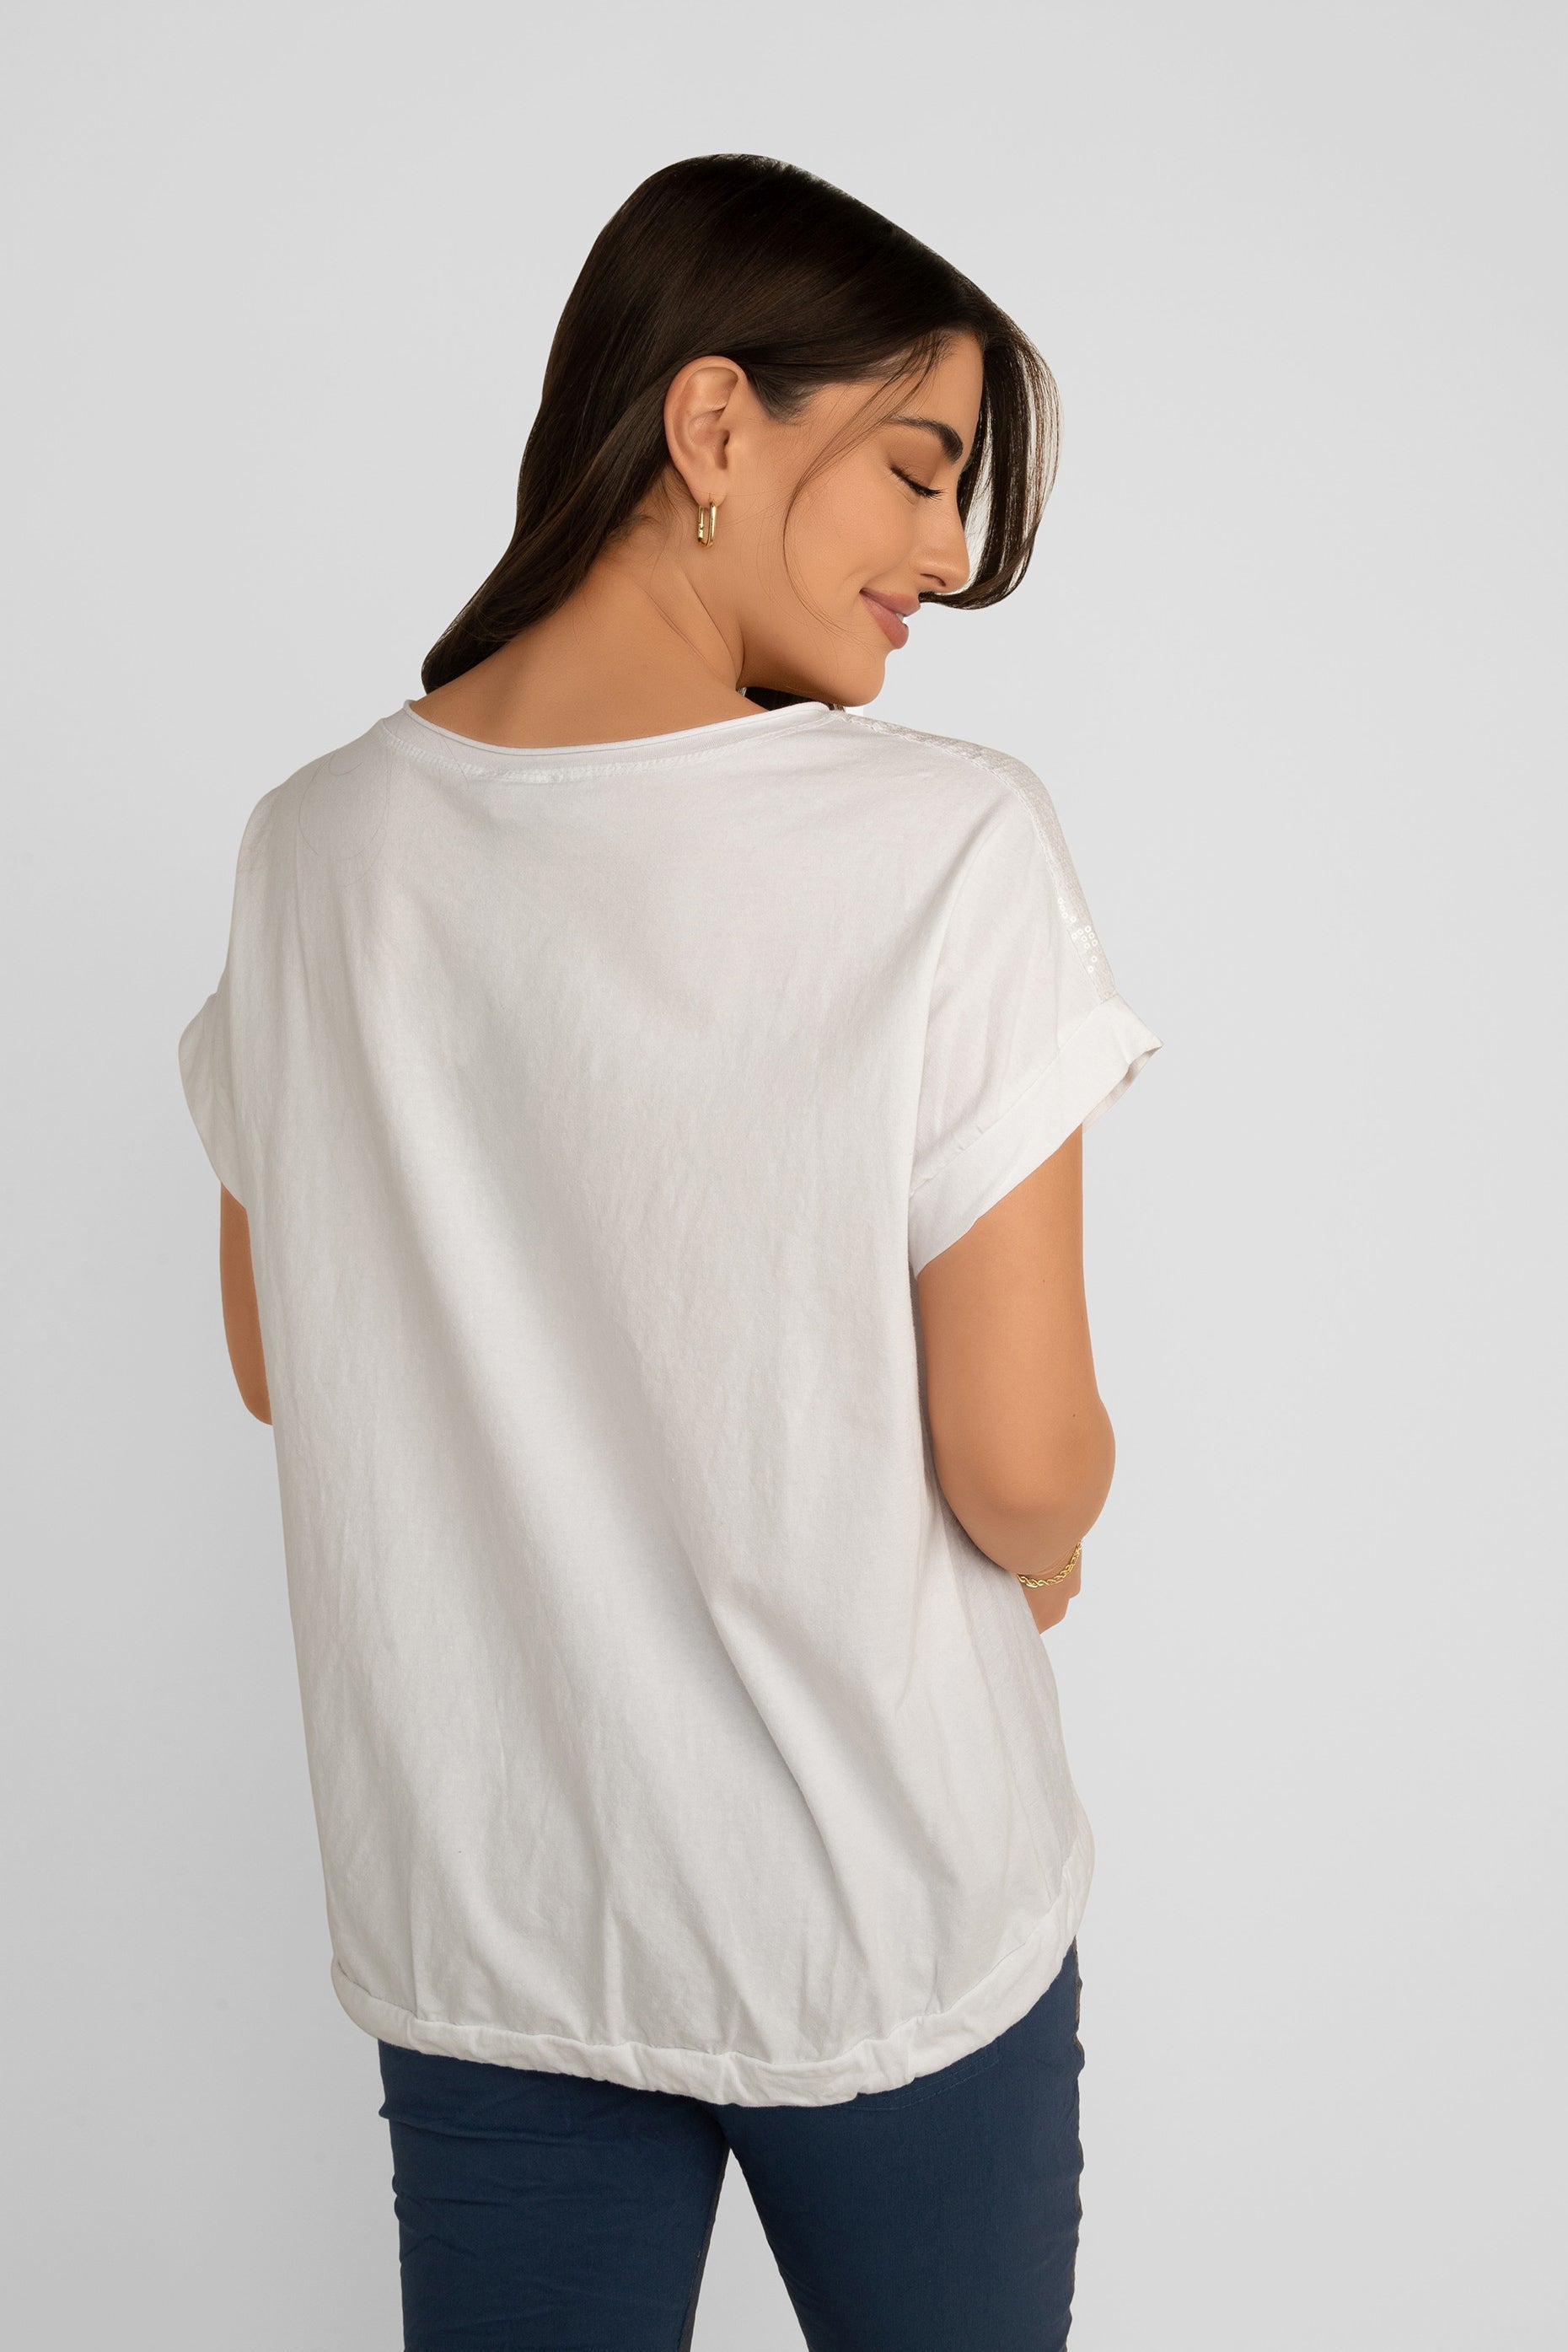 Back view of Elissia (LX34137A) Women's Dragonfly T-Shirt with Sequin Shoulders and Drawstring Hem in White